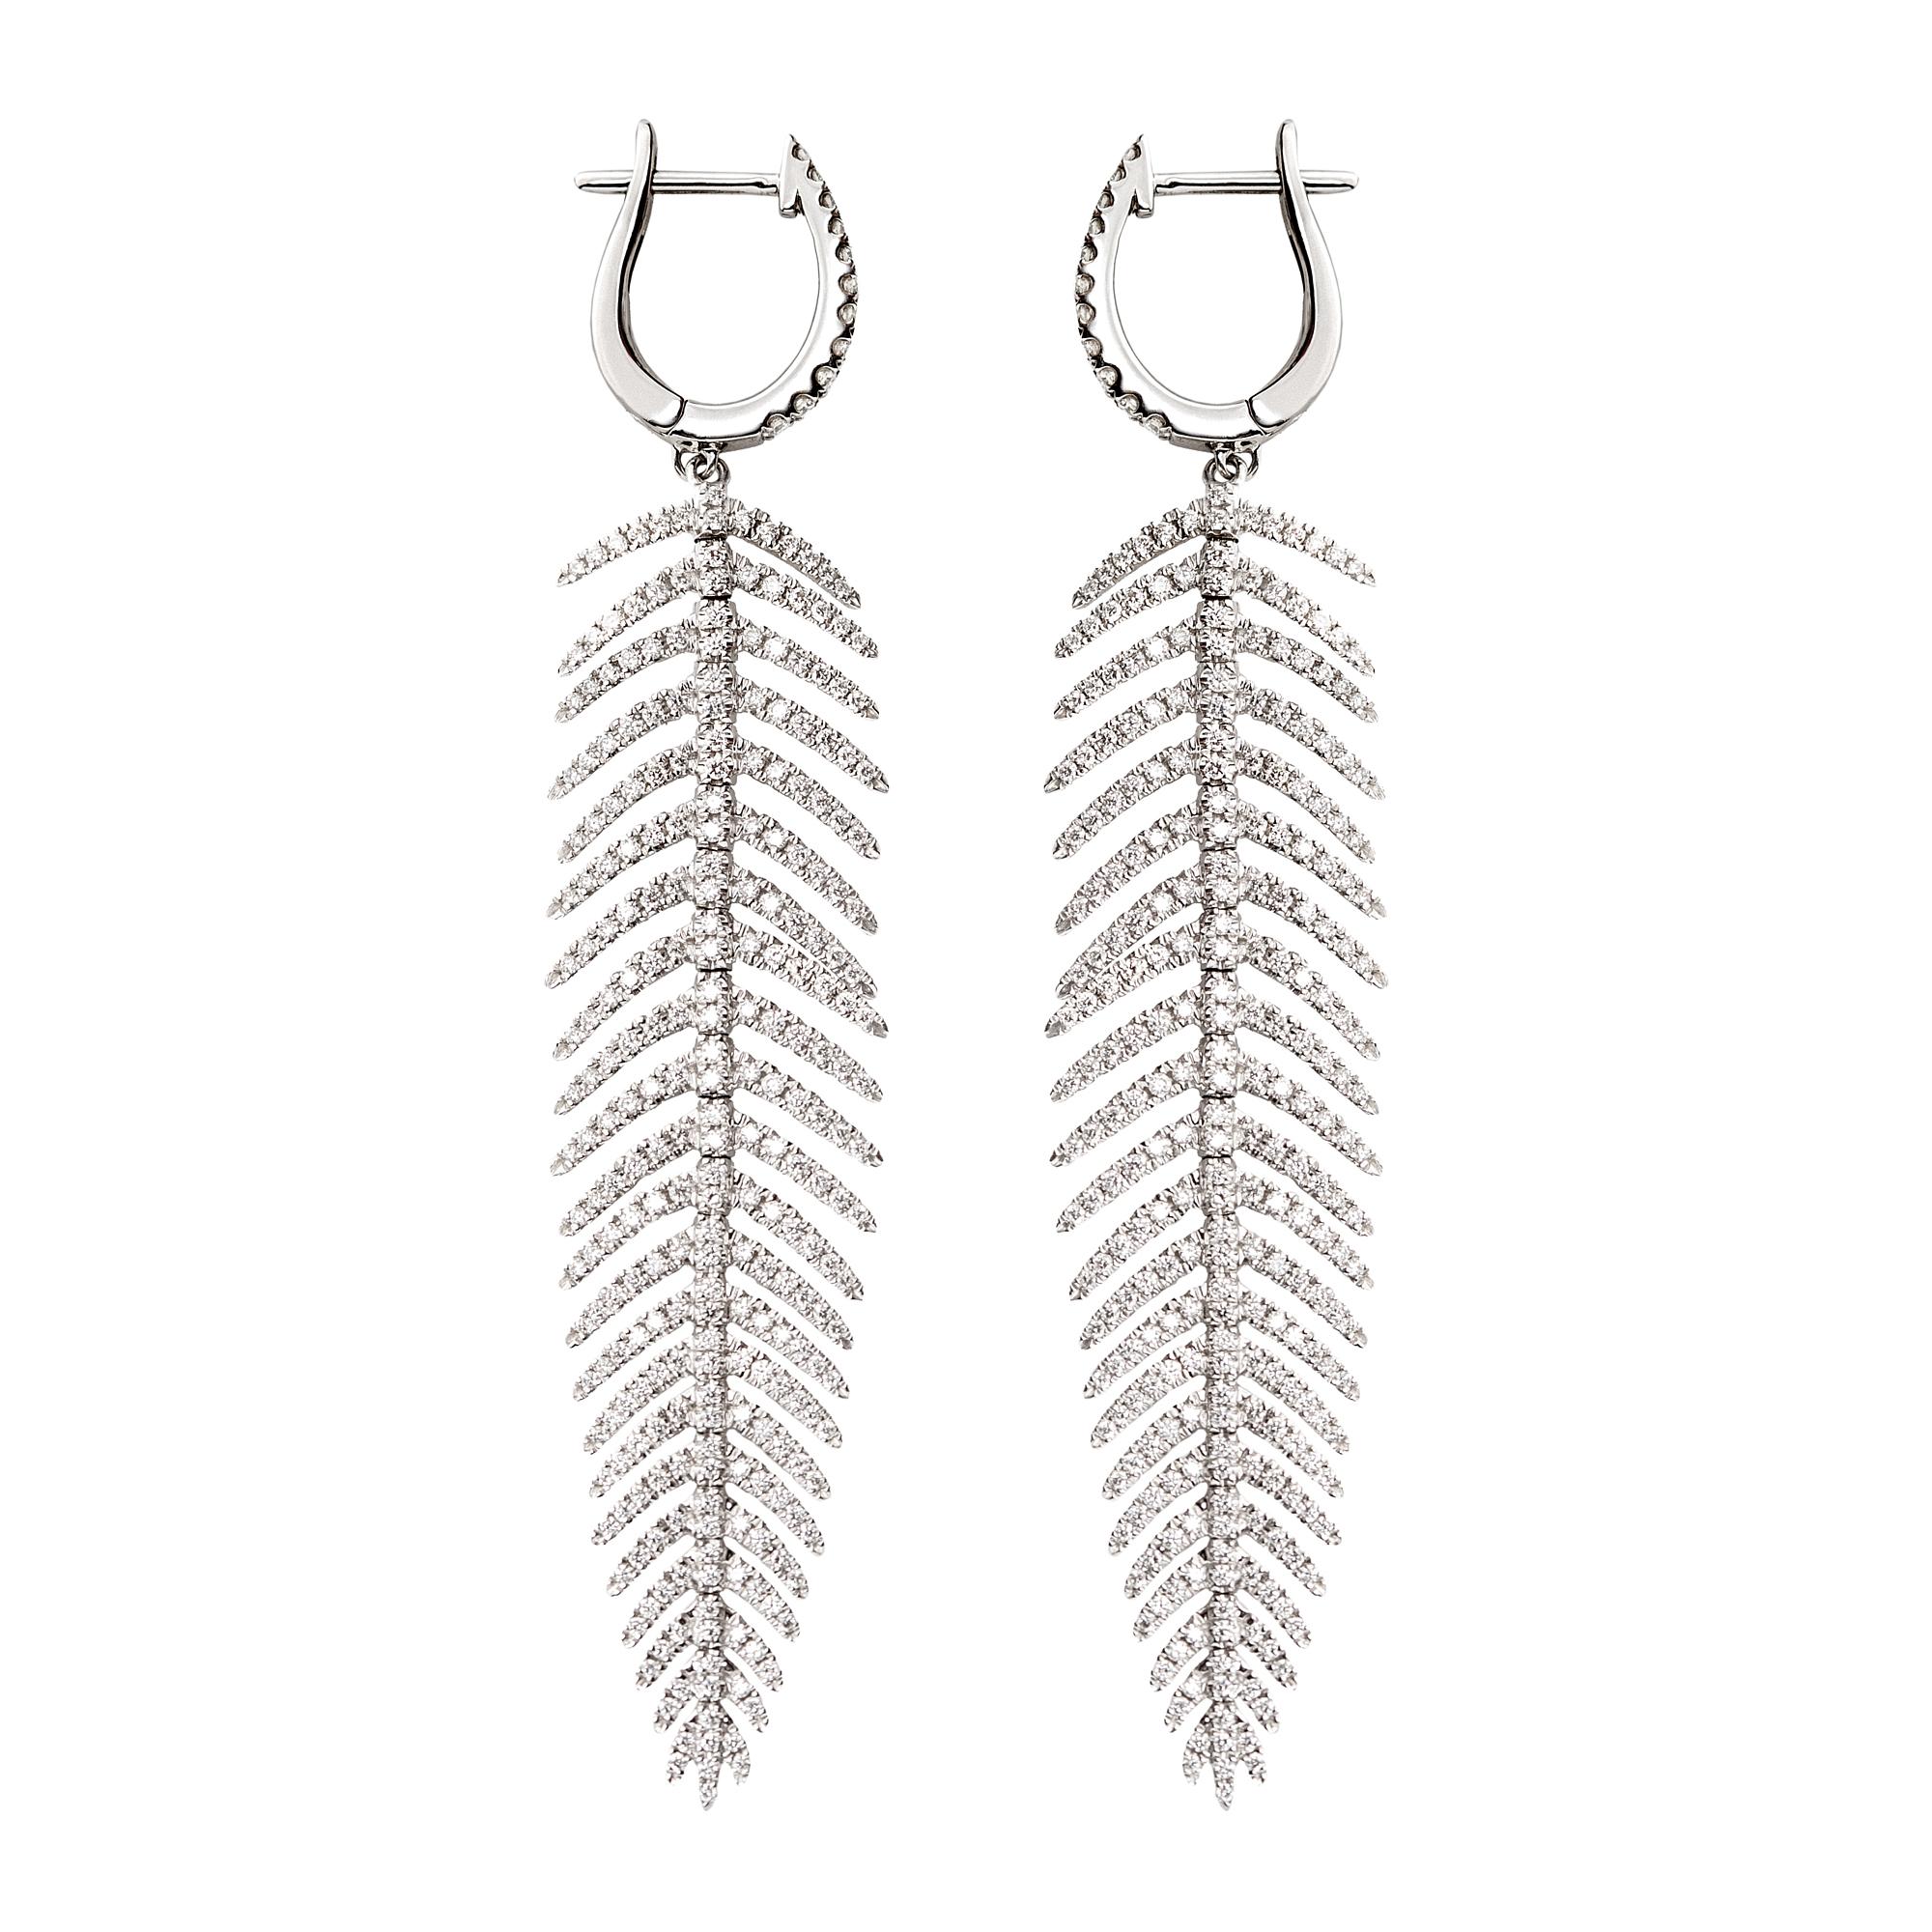 These exotic diamond encrusted feathers move with you. The full-cut diamonds reflect the light with a shimmer. 

Of articulated feather design 
3 inches in length
5/8 inches at widest 
570 full-cut diamonds
Approximate diamond total carat weight is